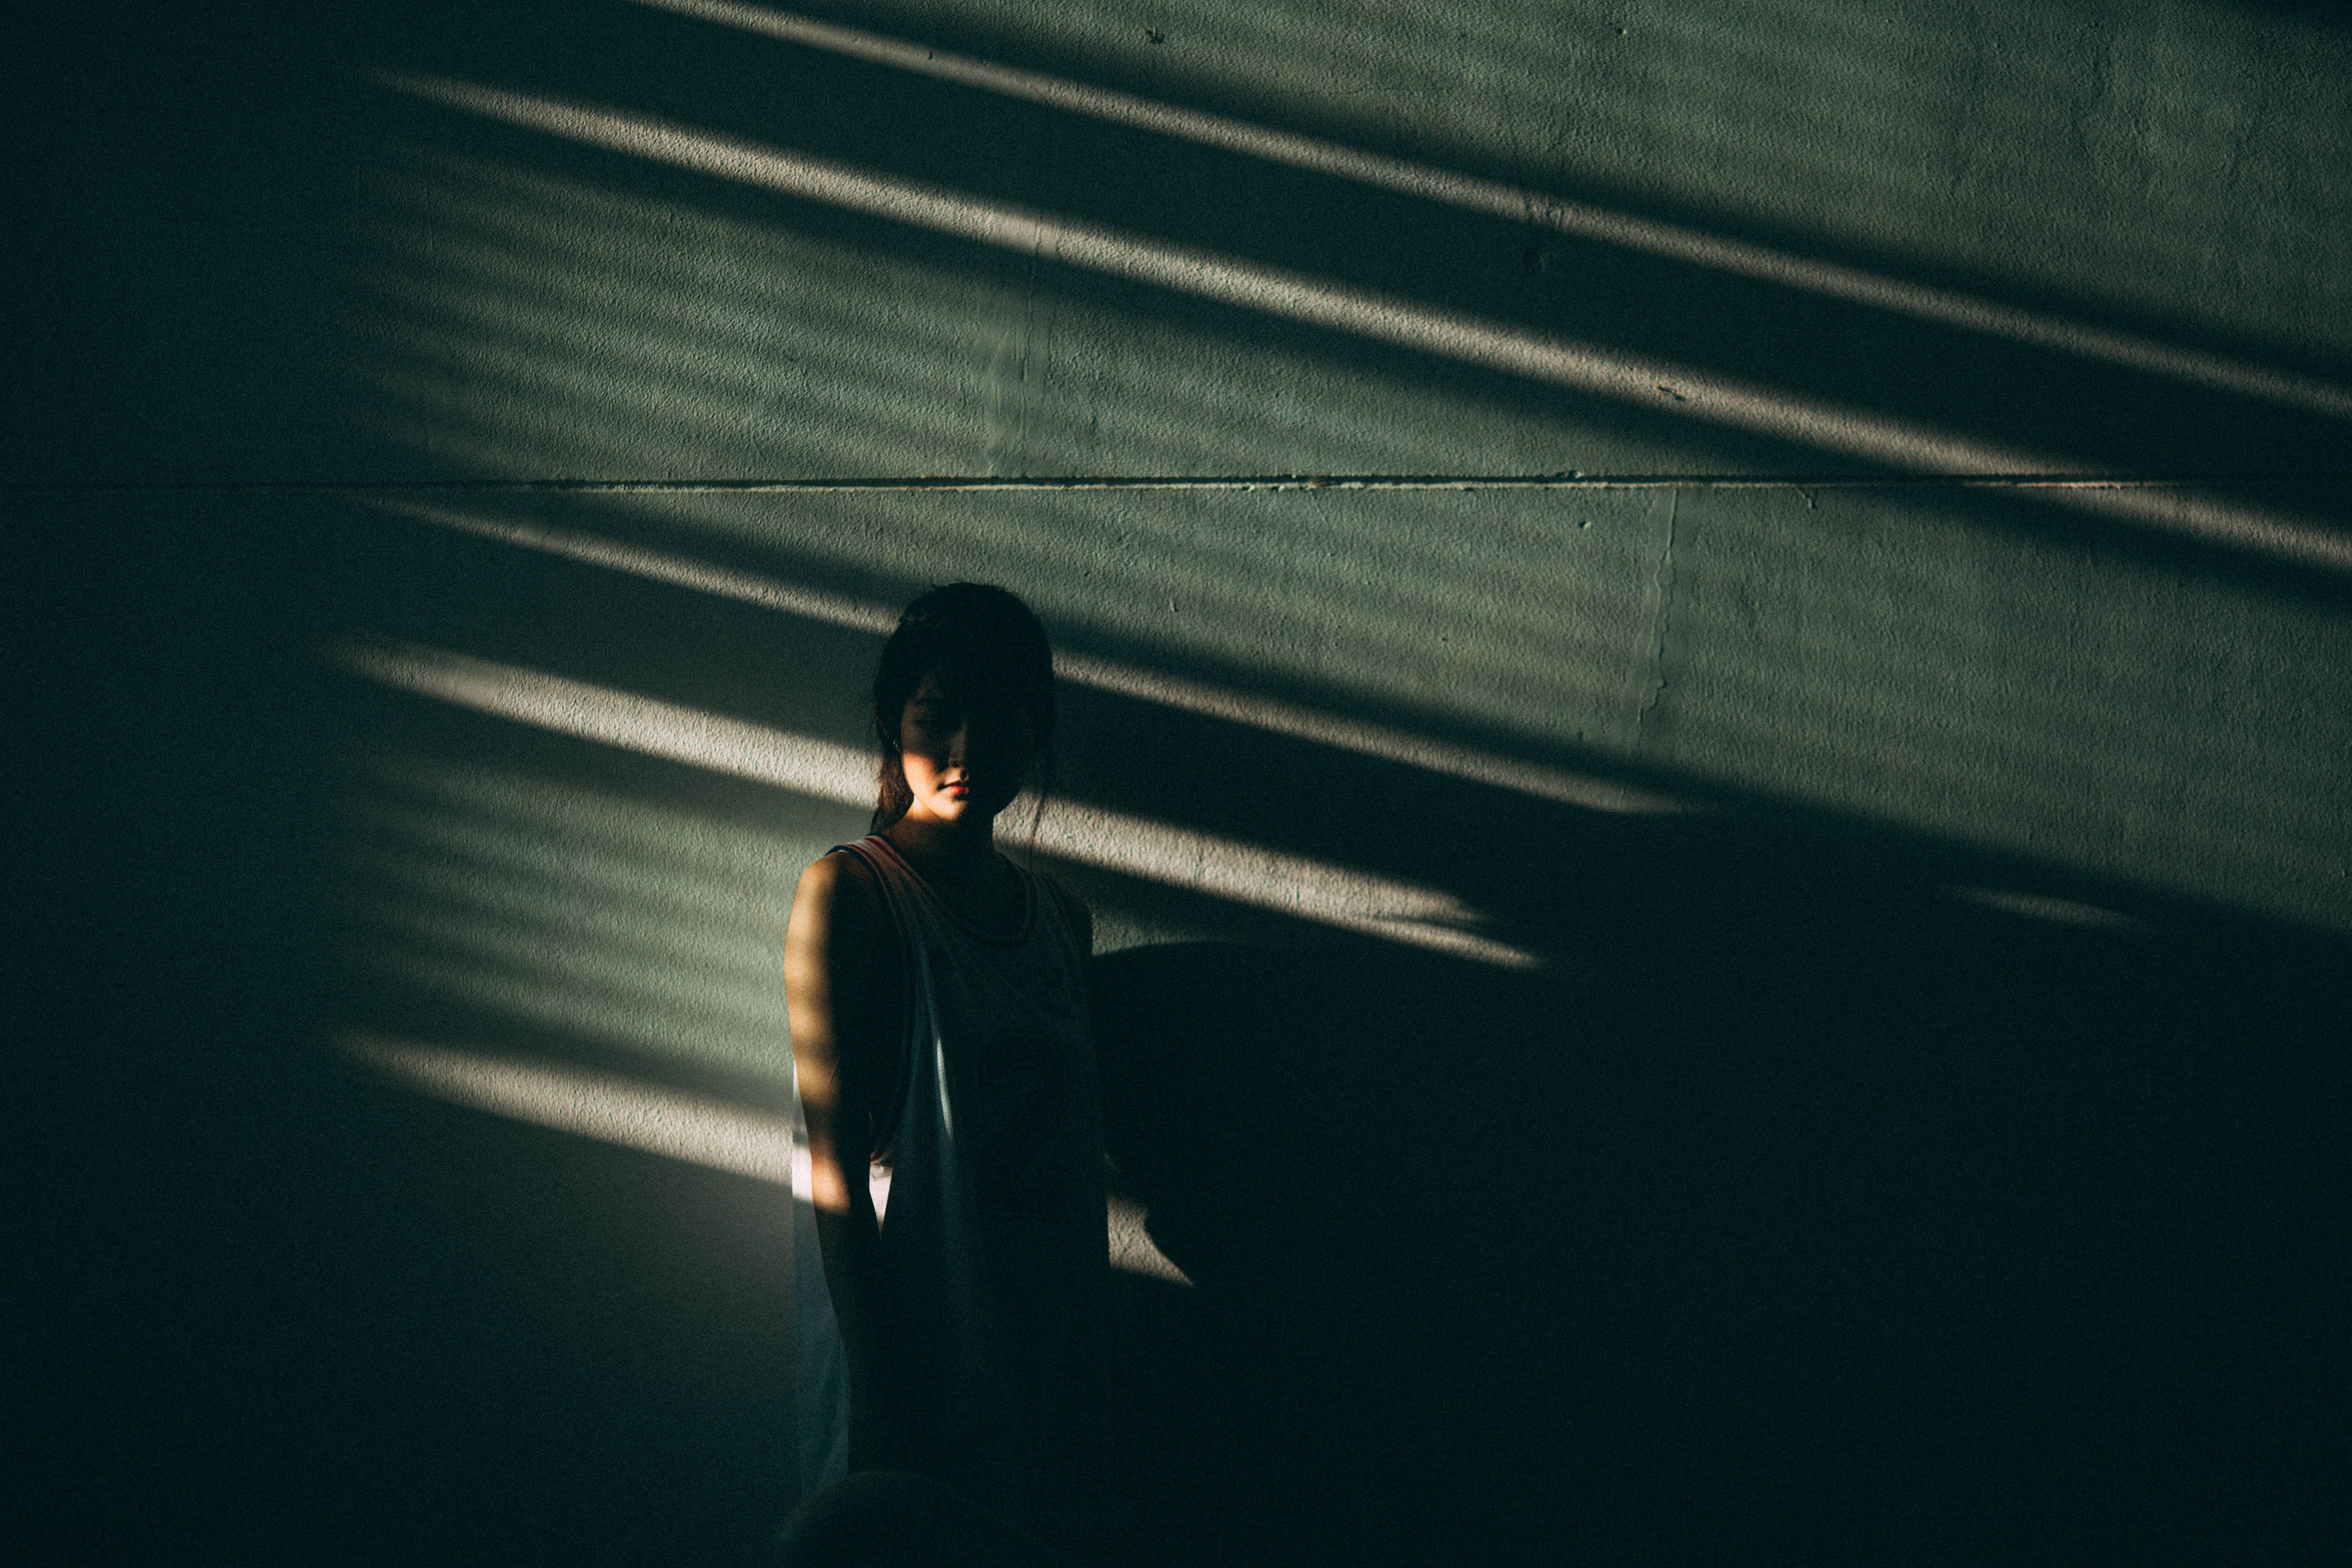 5472x3648 #female, #light, #lonely, #woman, #shadow